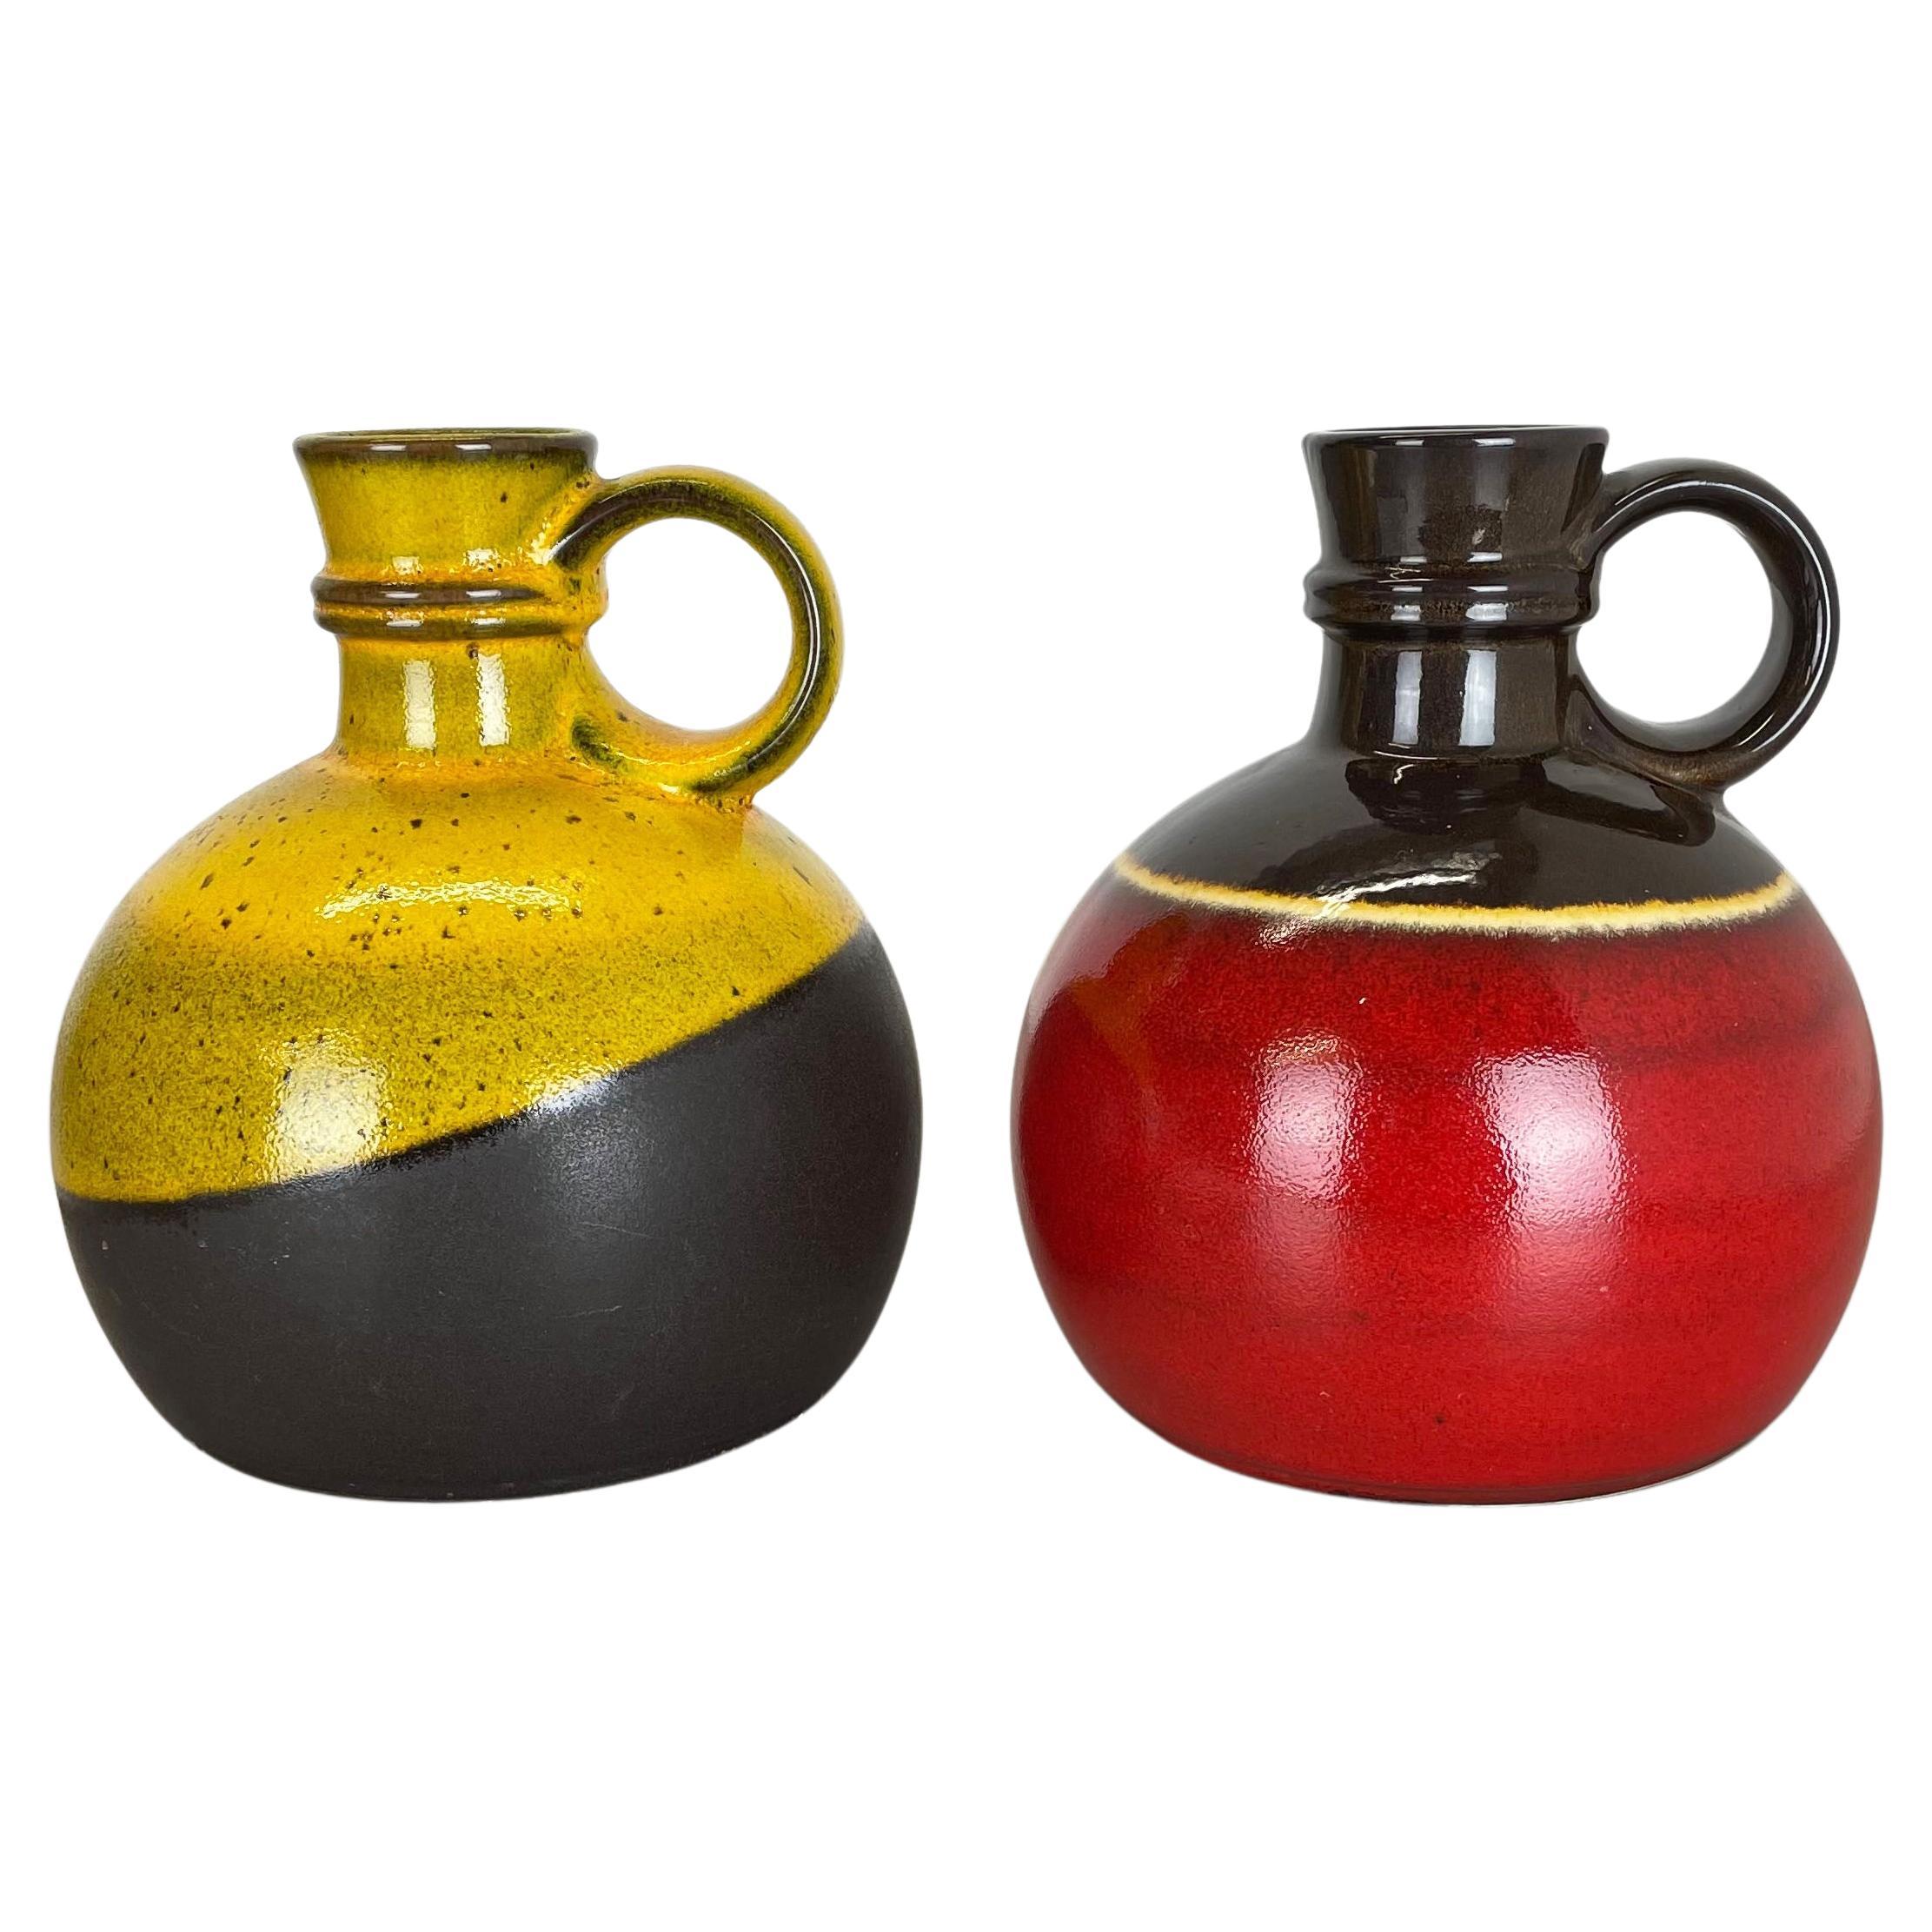 Set of Two Pottery Vases "red yellow" Objects by Steuler Ceramics Germany, 1970s For Sale